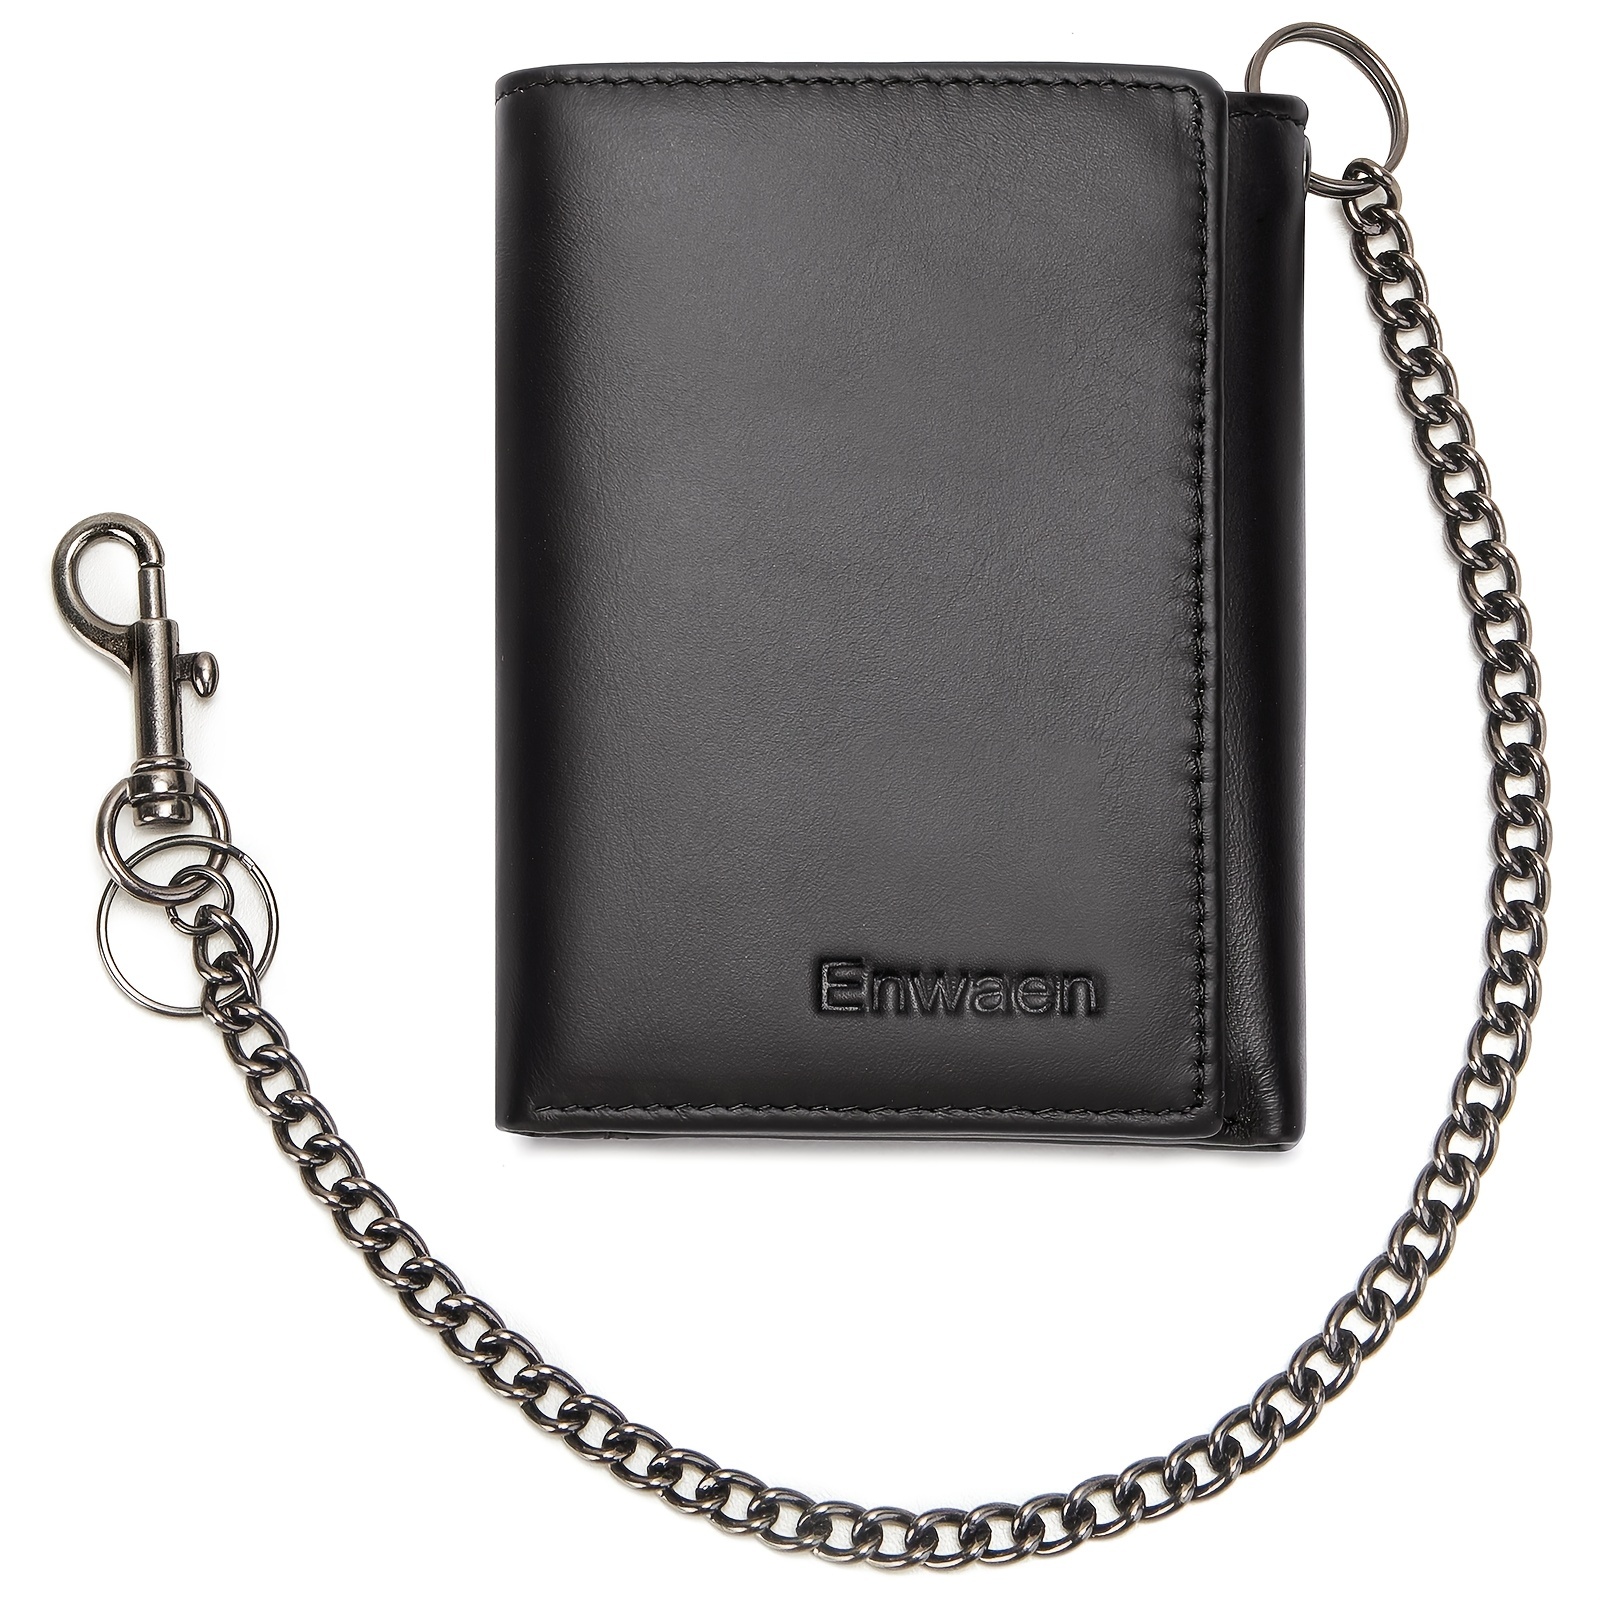 bill heart Mens Wallet with Chain Genuine Leather Purse RFID Blocking  Bifold Double Zipper Coin Pocket with Anti-Theft Chain